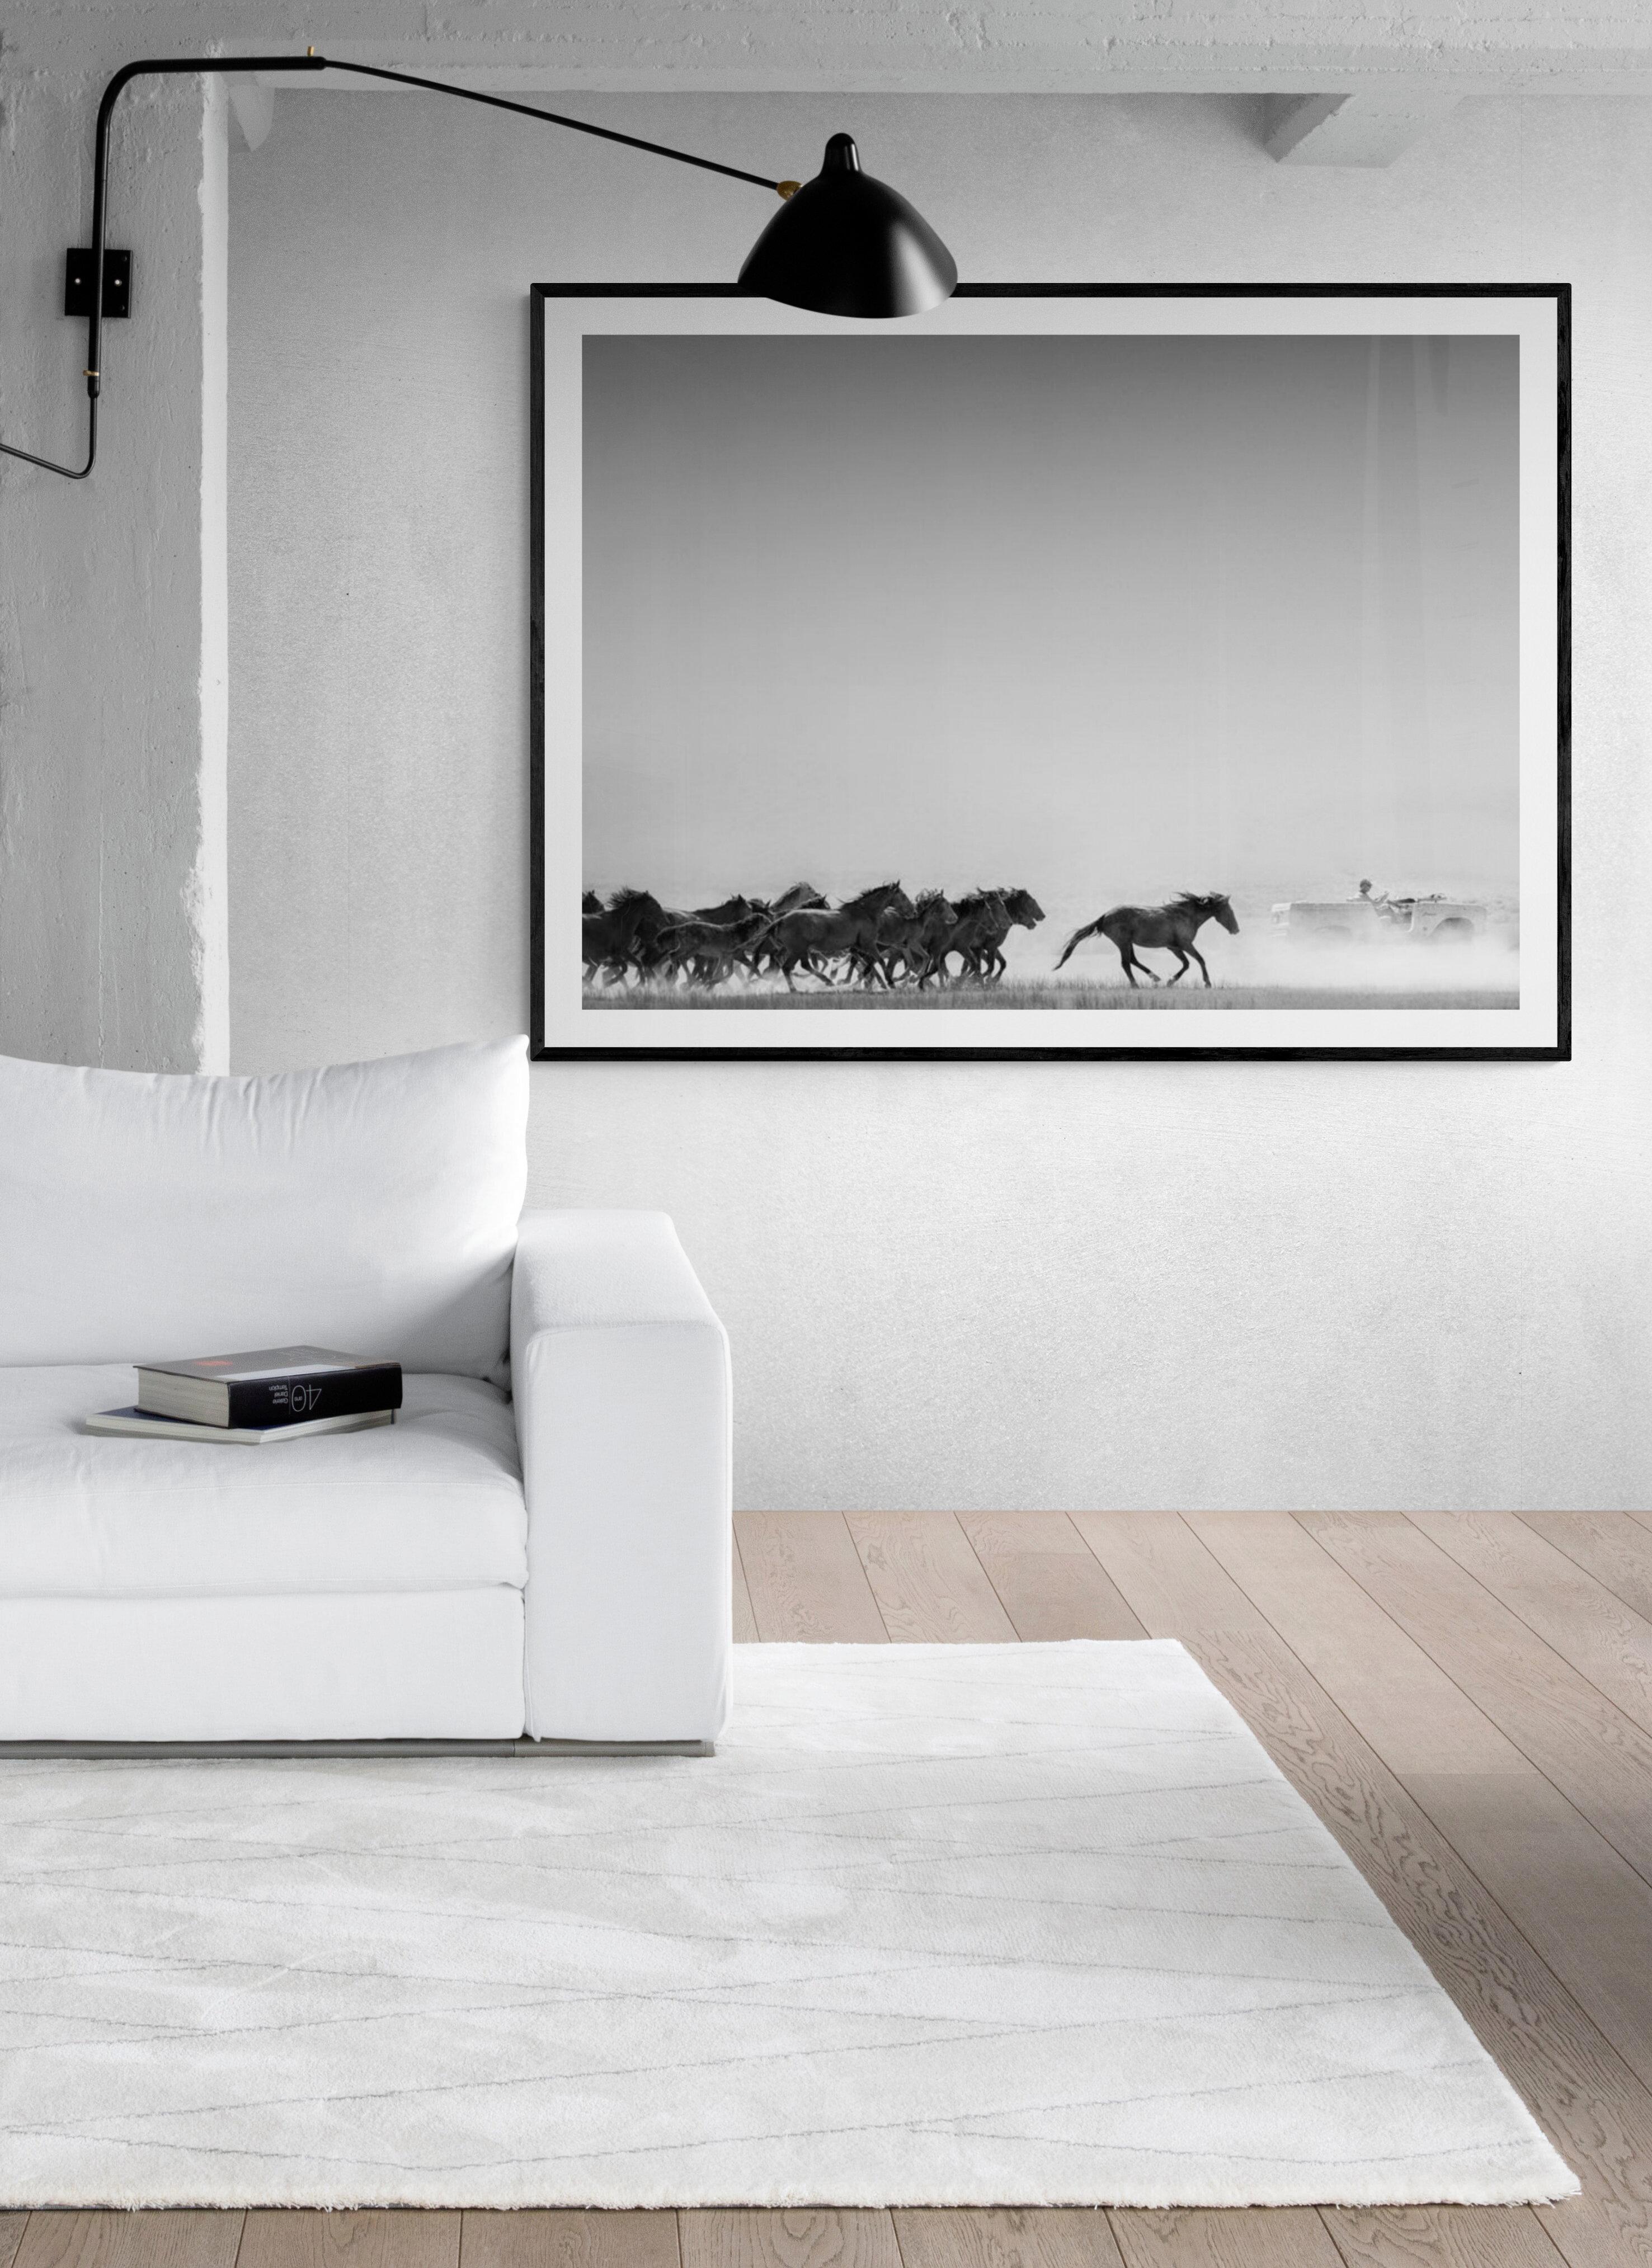 40x60 AMERICAN HORSE POWER B&W Photography Wild Horses Mustangs FORD BRONCO  - Print by Shane Russeck